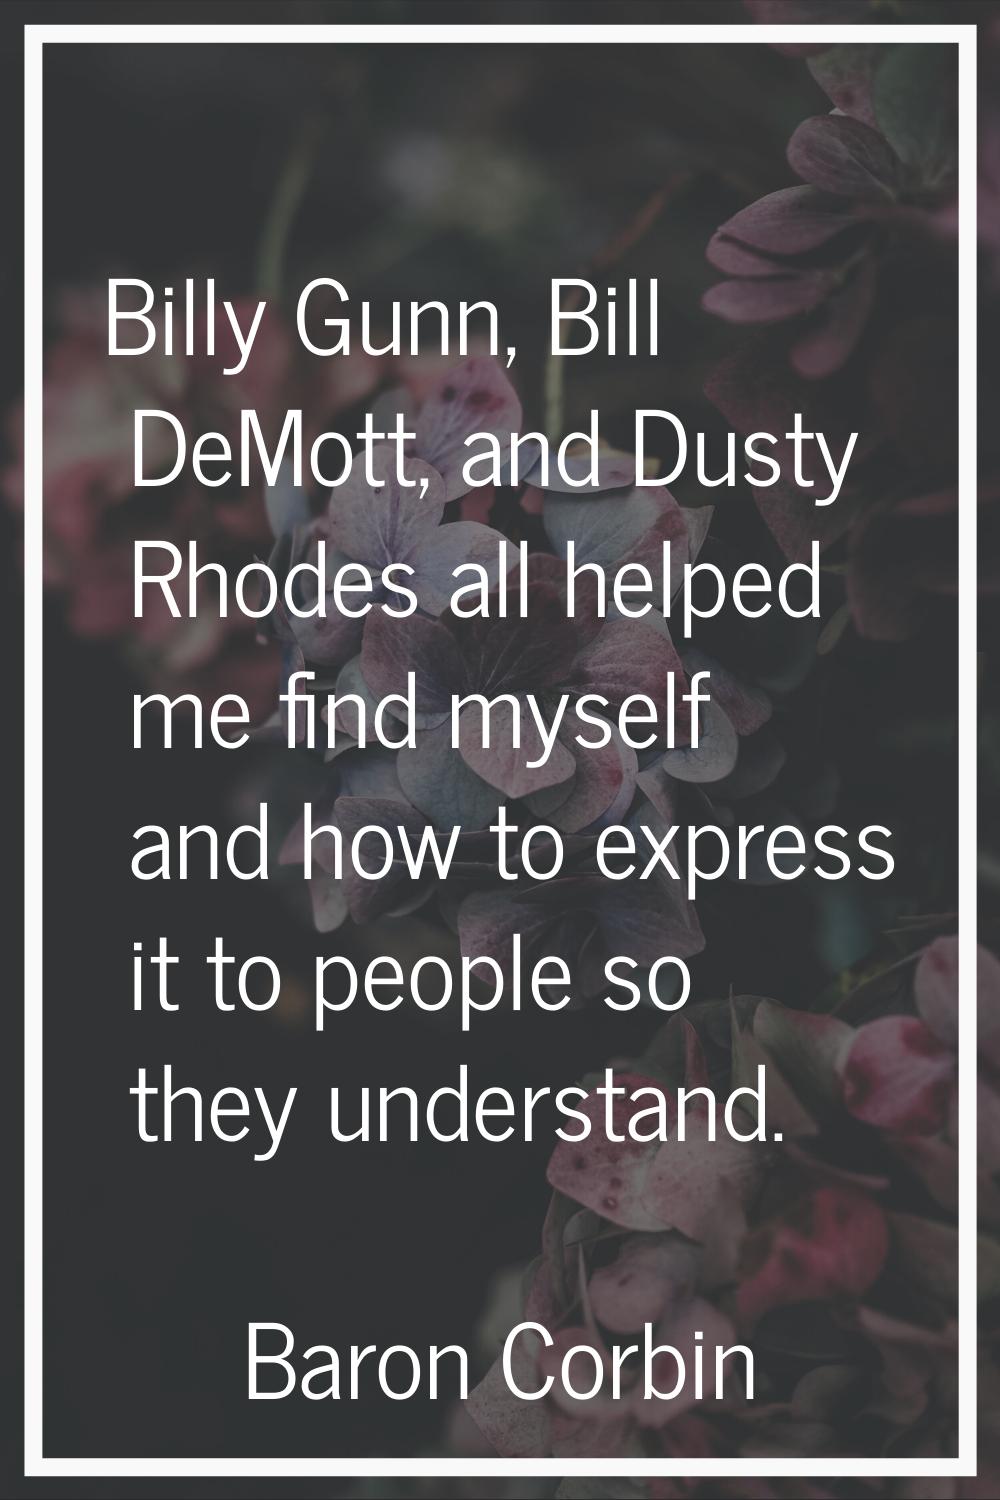 Billy Gunn, Bill DeMott, and Dusty Rhodes all helped me find myself and how to express it to people